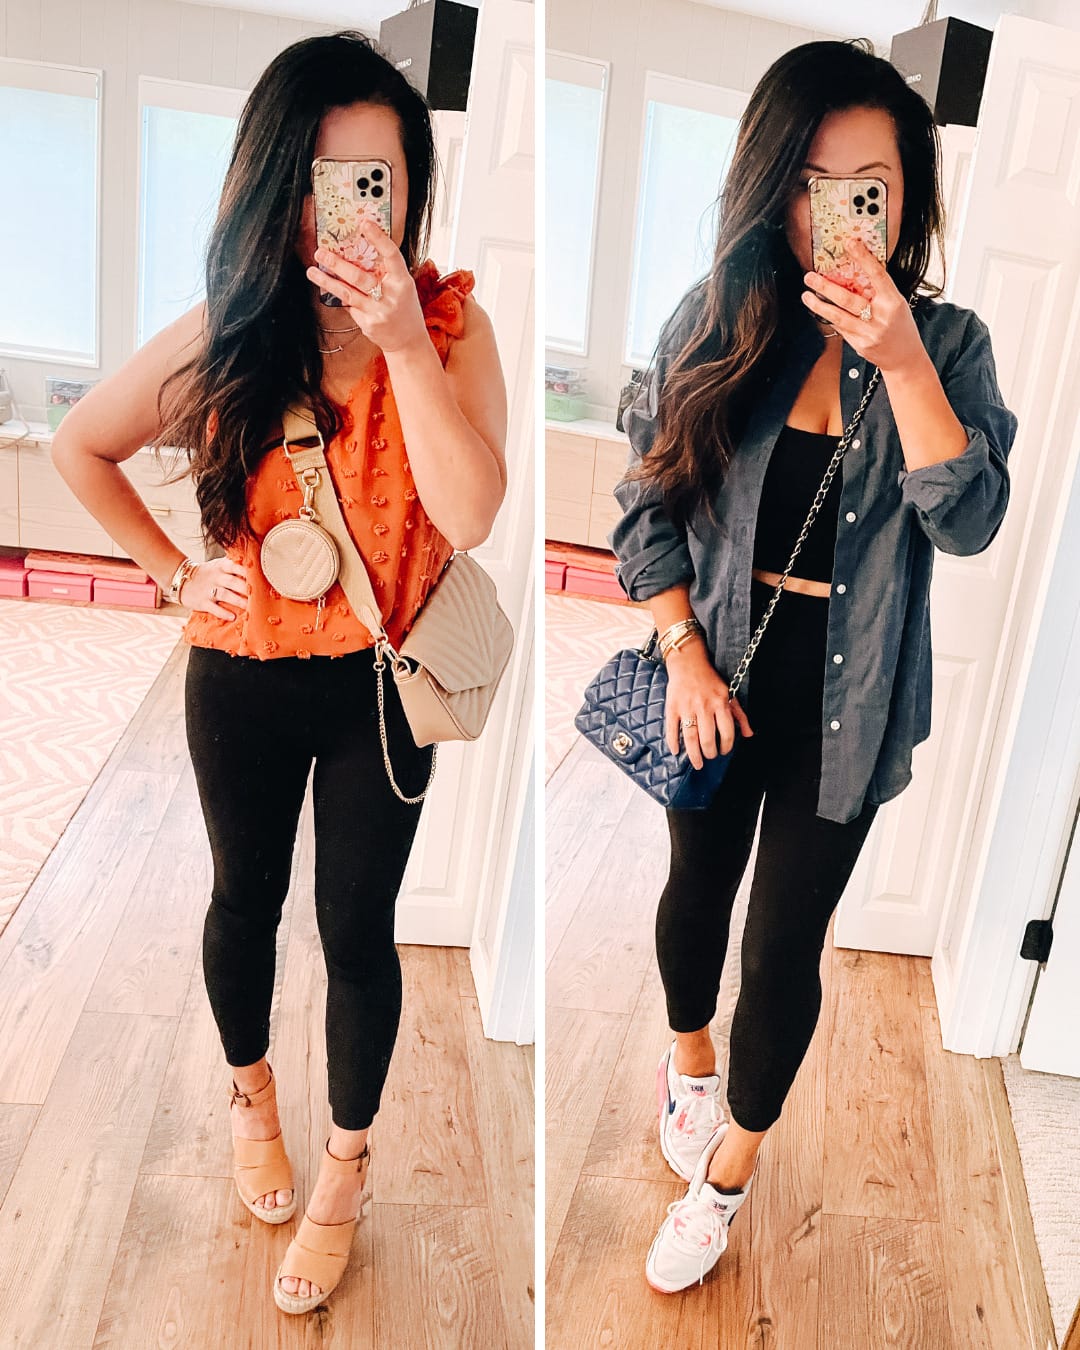 Leggings Hot Weather Outfits (27 ideas & outfits)